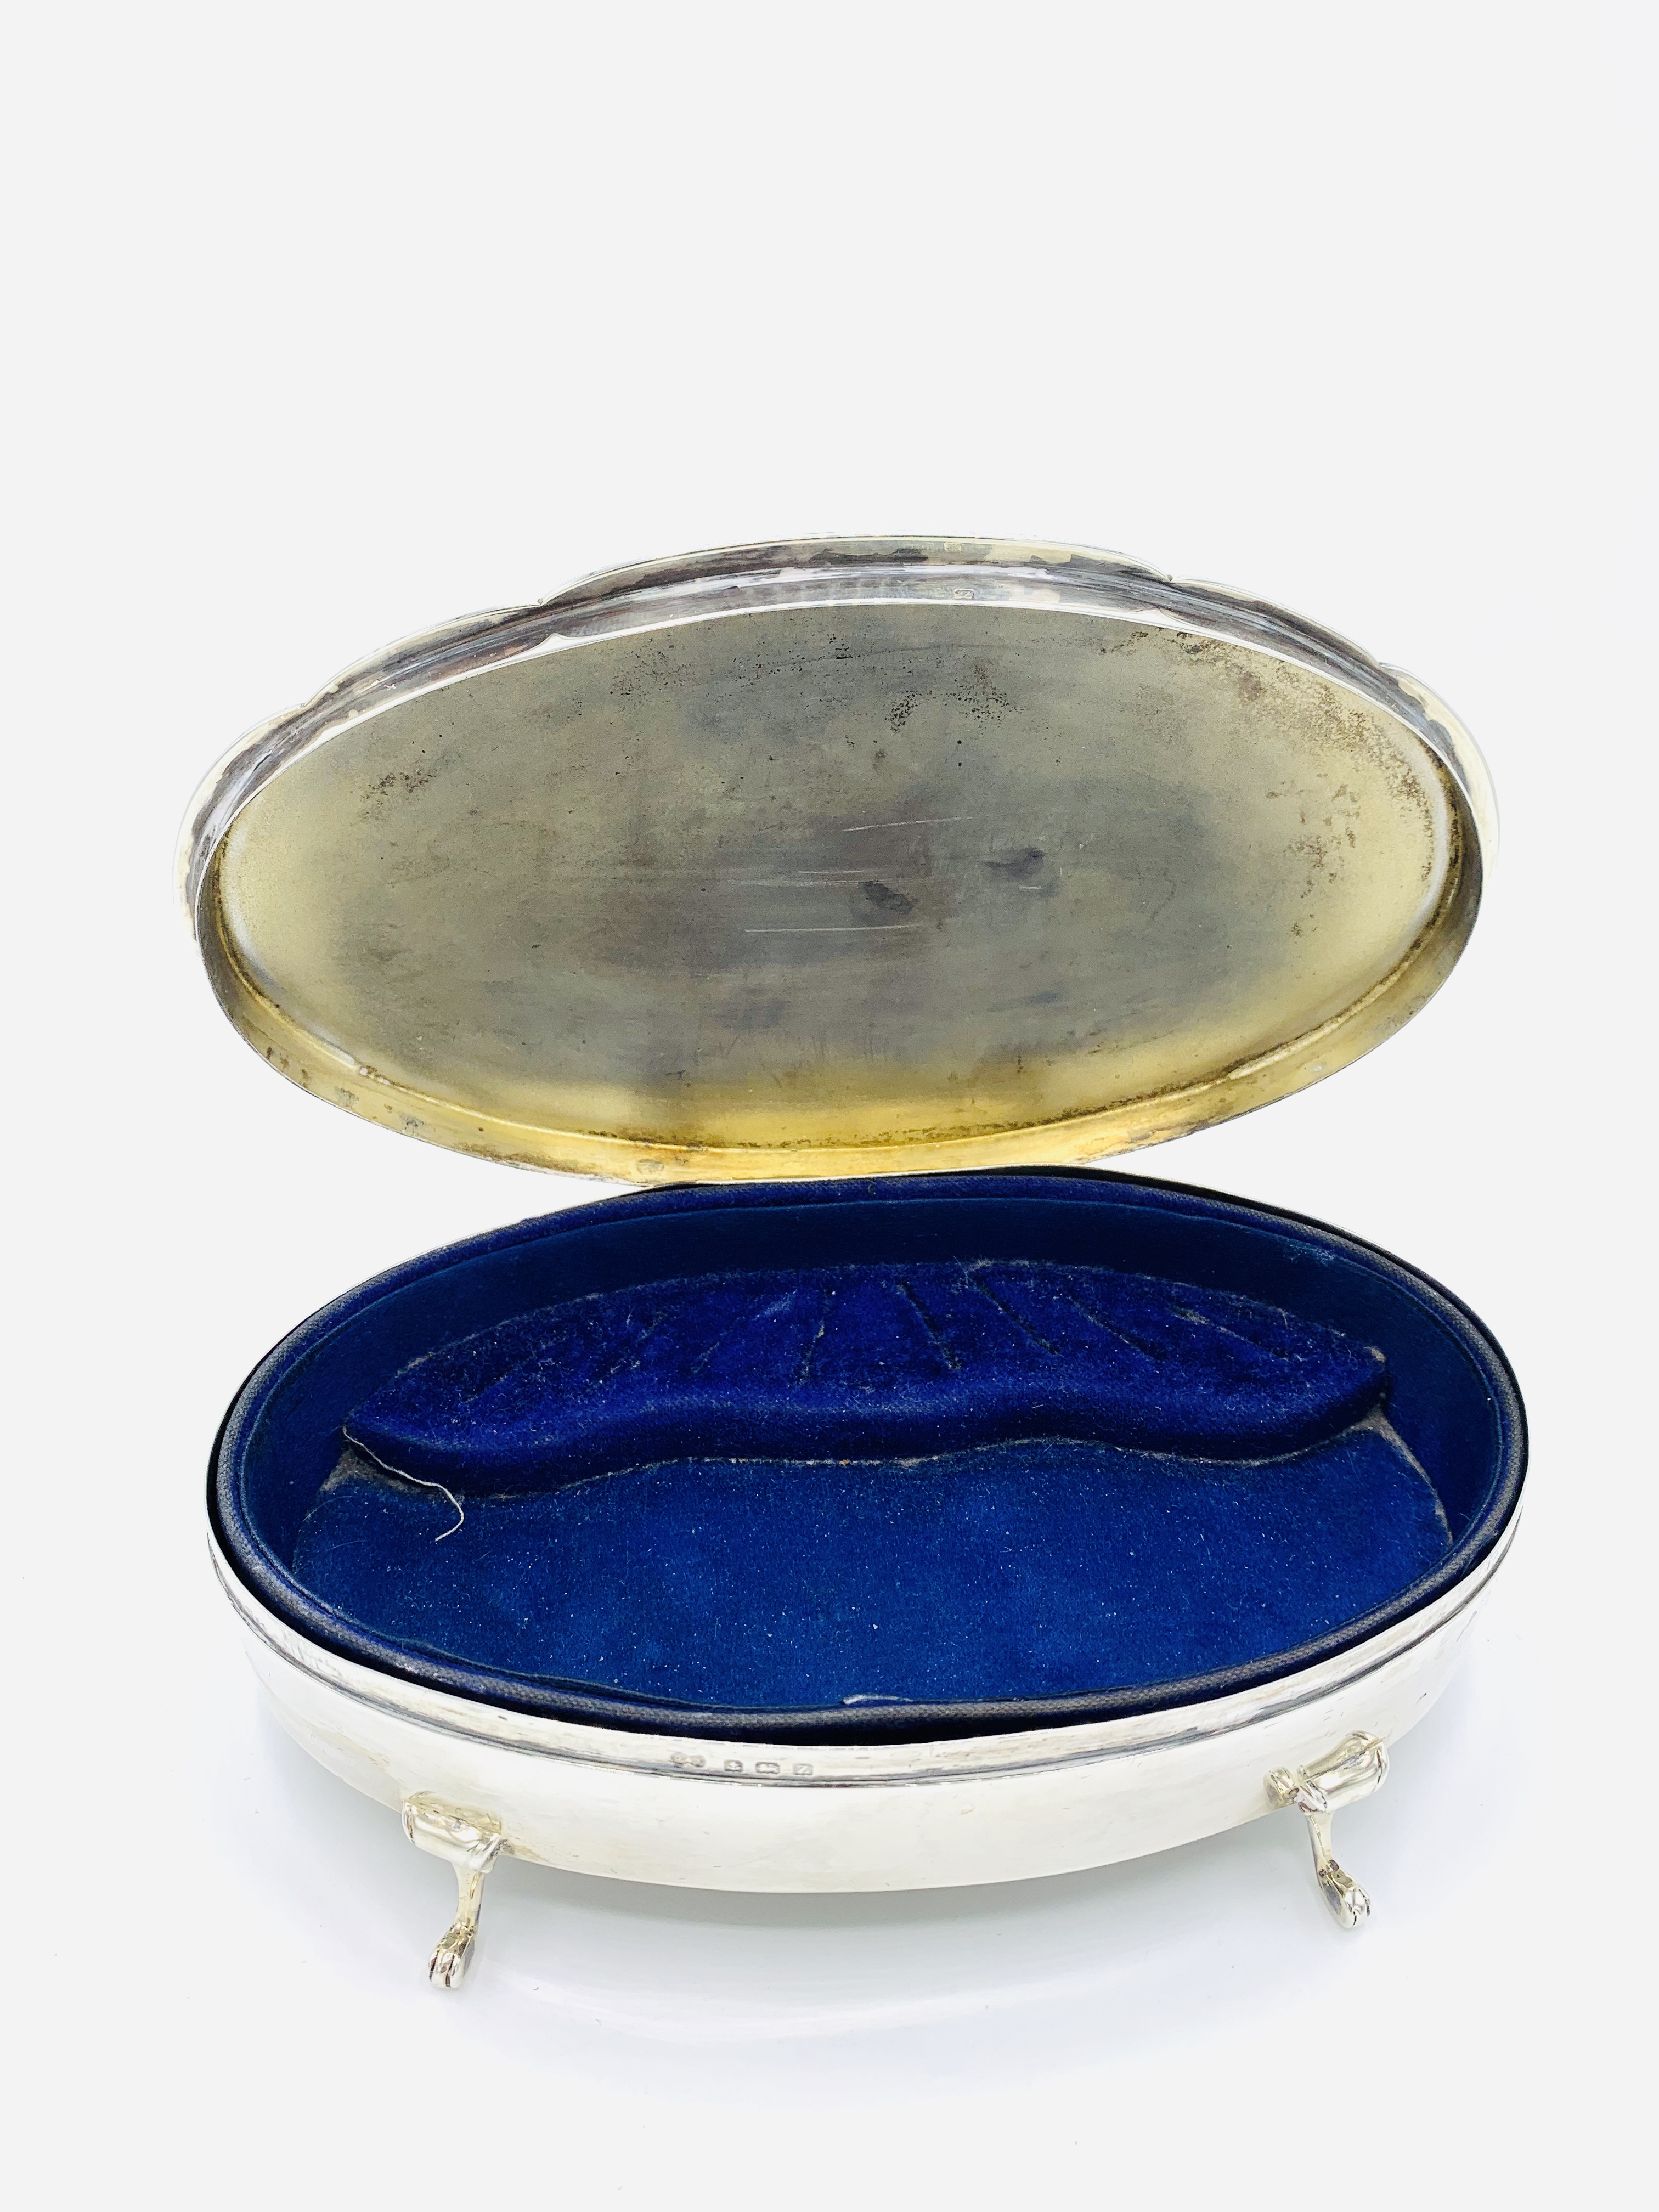 Lady's sterling silver dressing table footed trinket box engraved 'Beryl' - Image 2 of 2